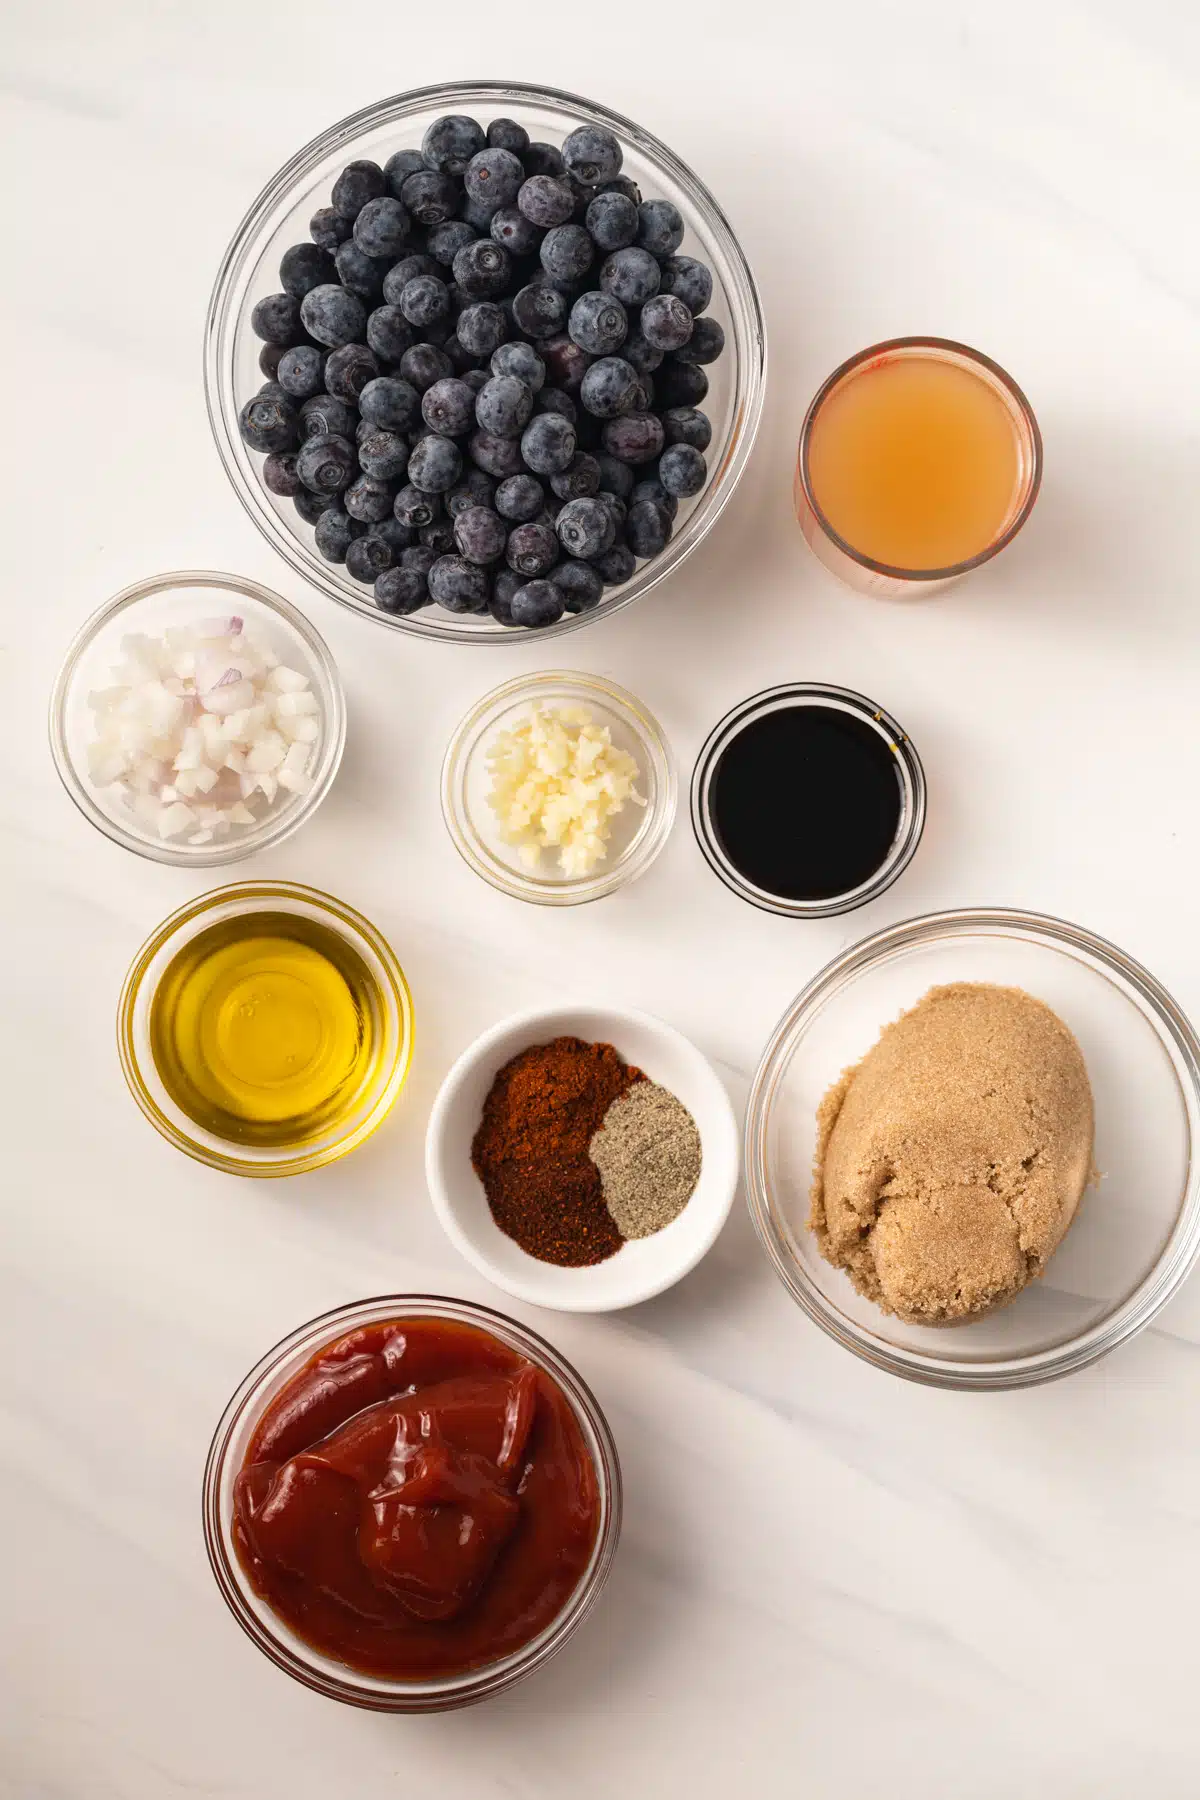 Ingredients for blueberry BBQ sauce.